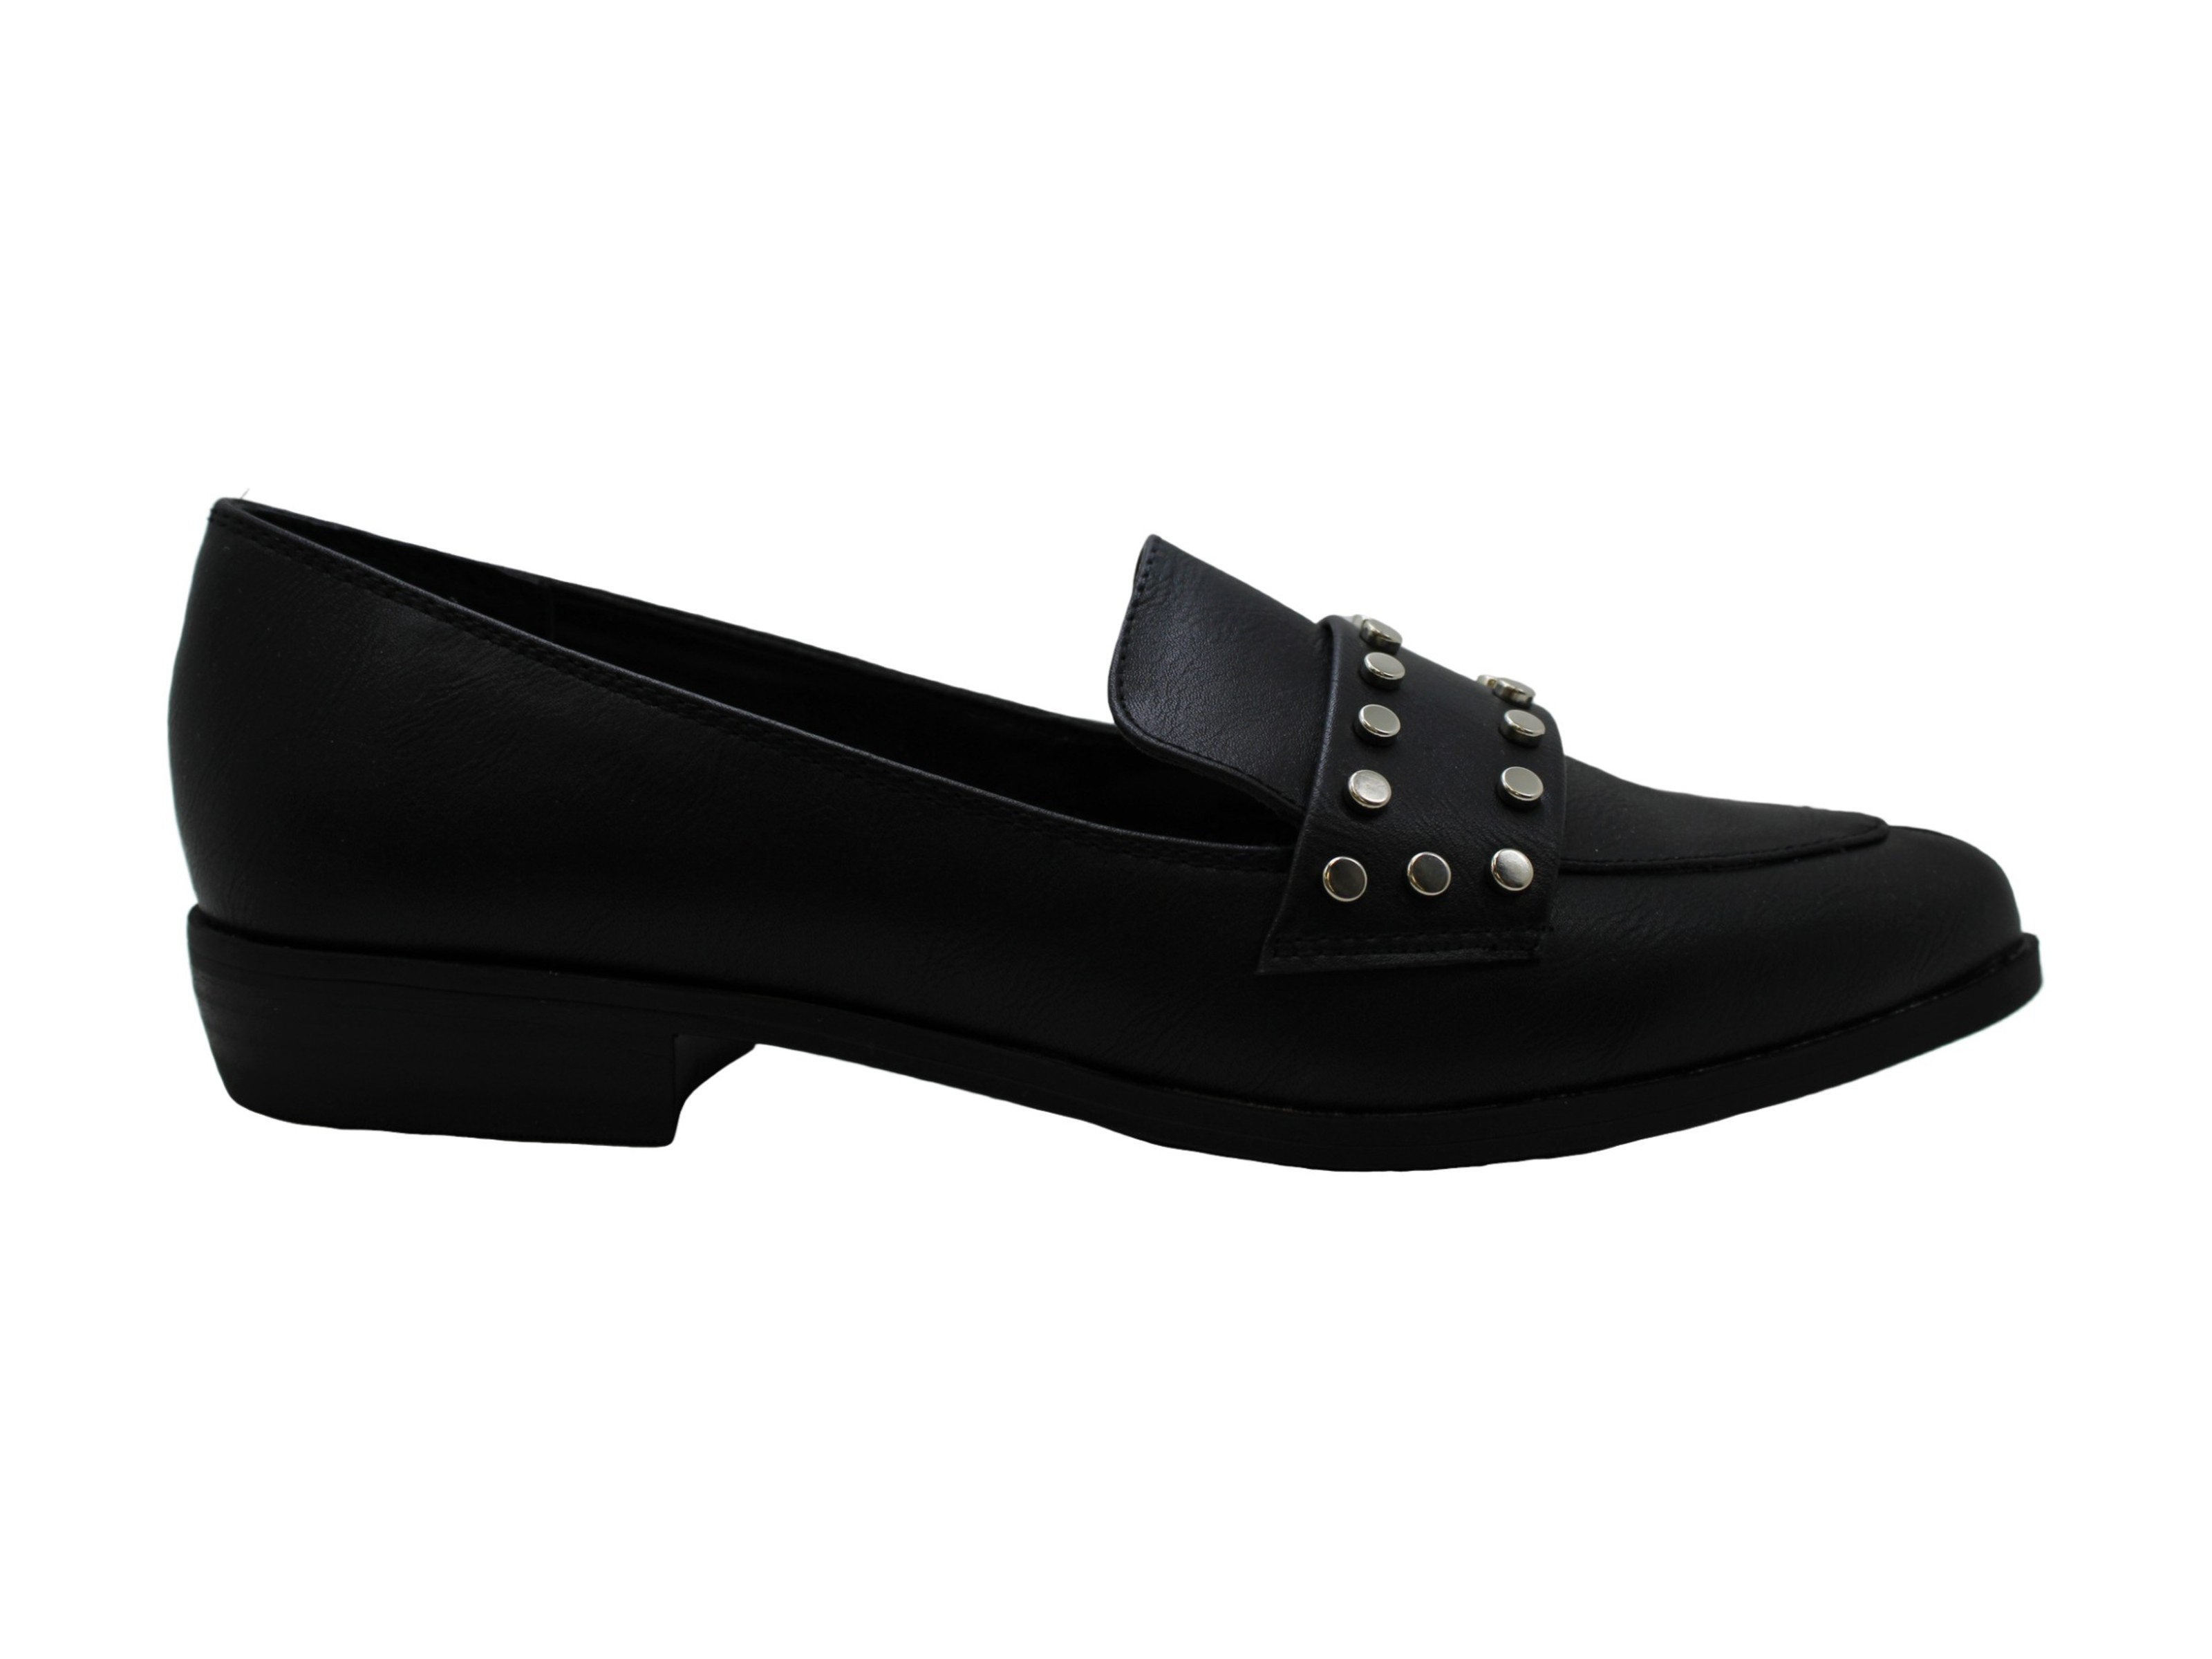 Bar III Womens Involve Pointed Toe Loafers, Black SM, Size 5.0 ...